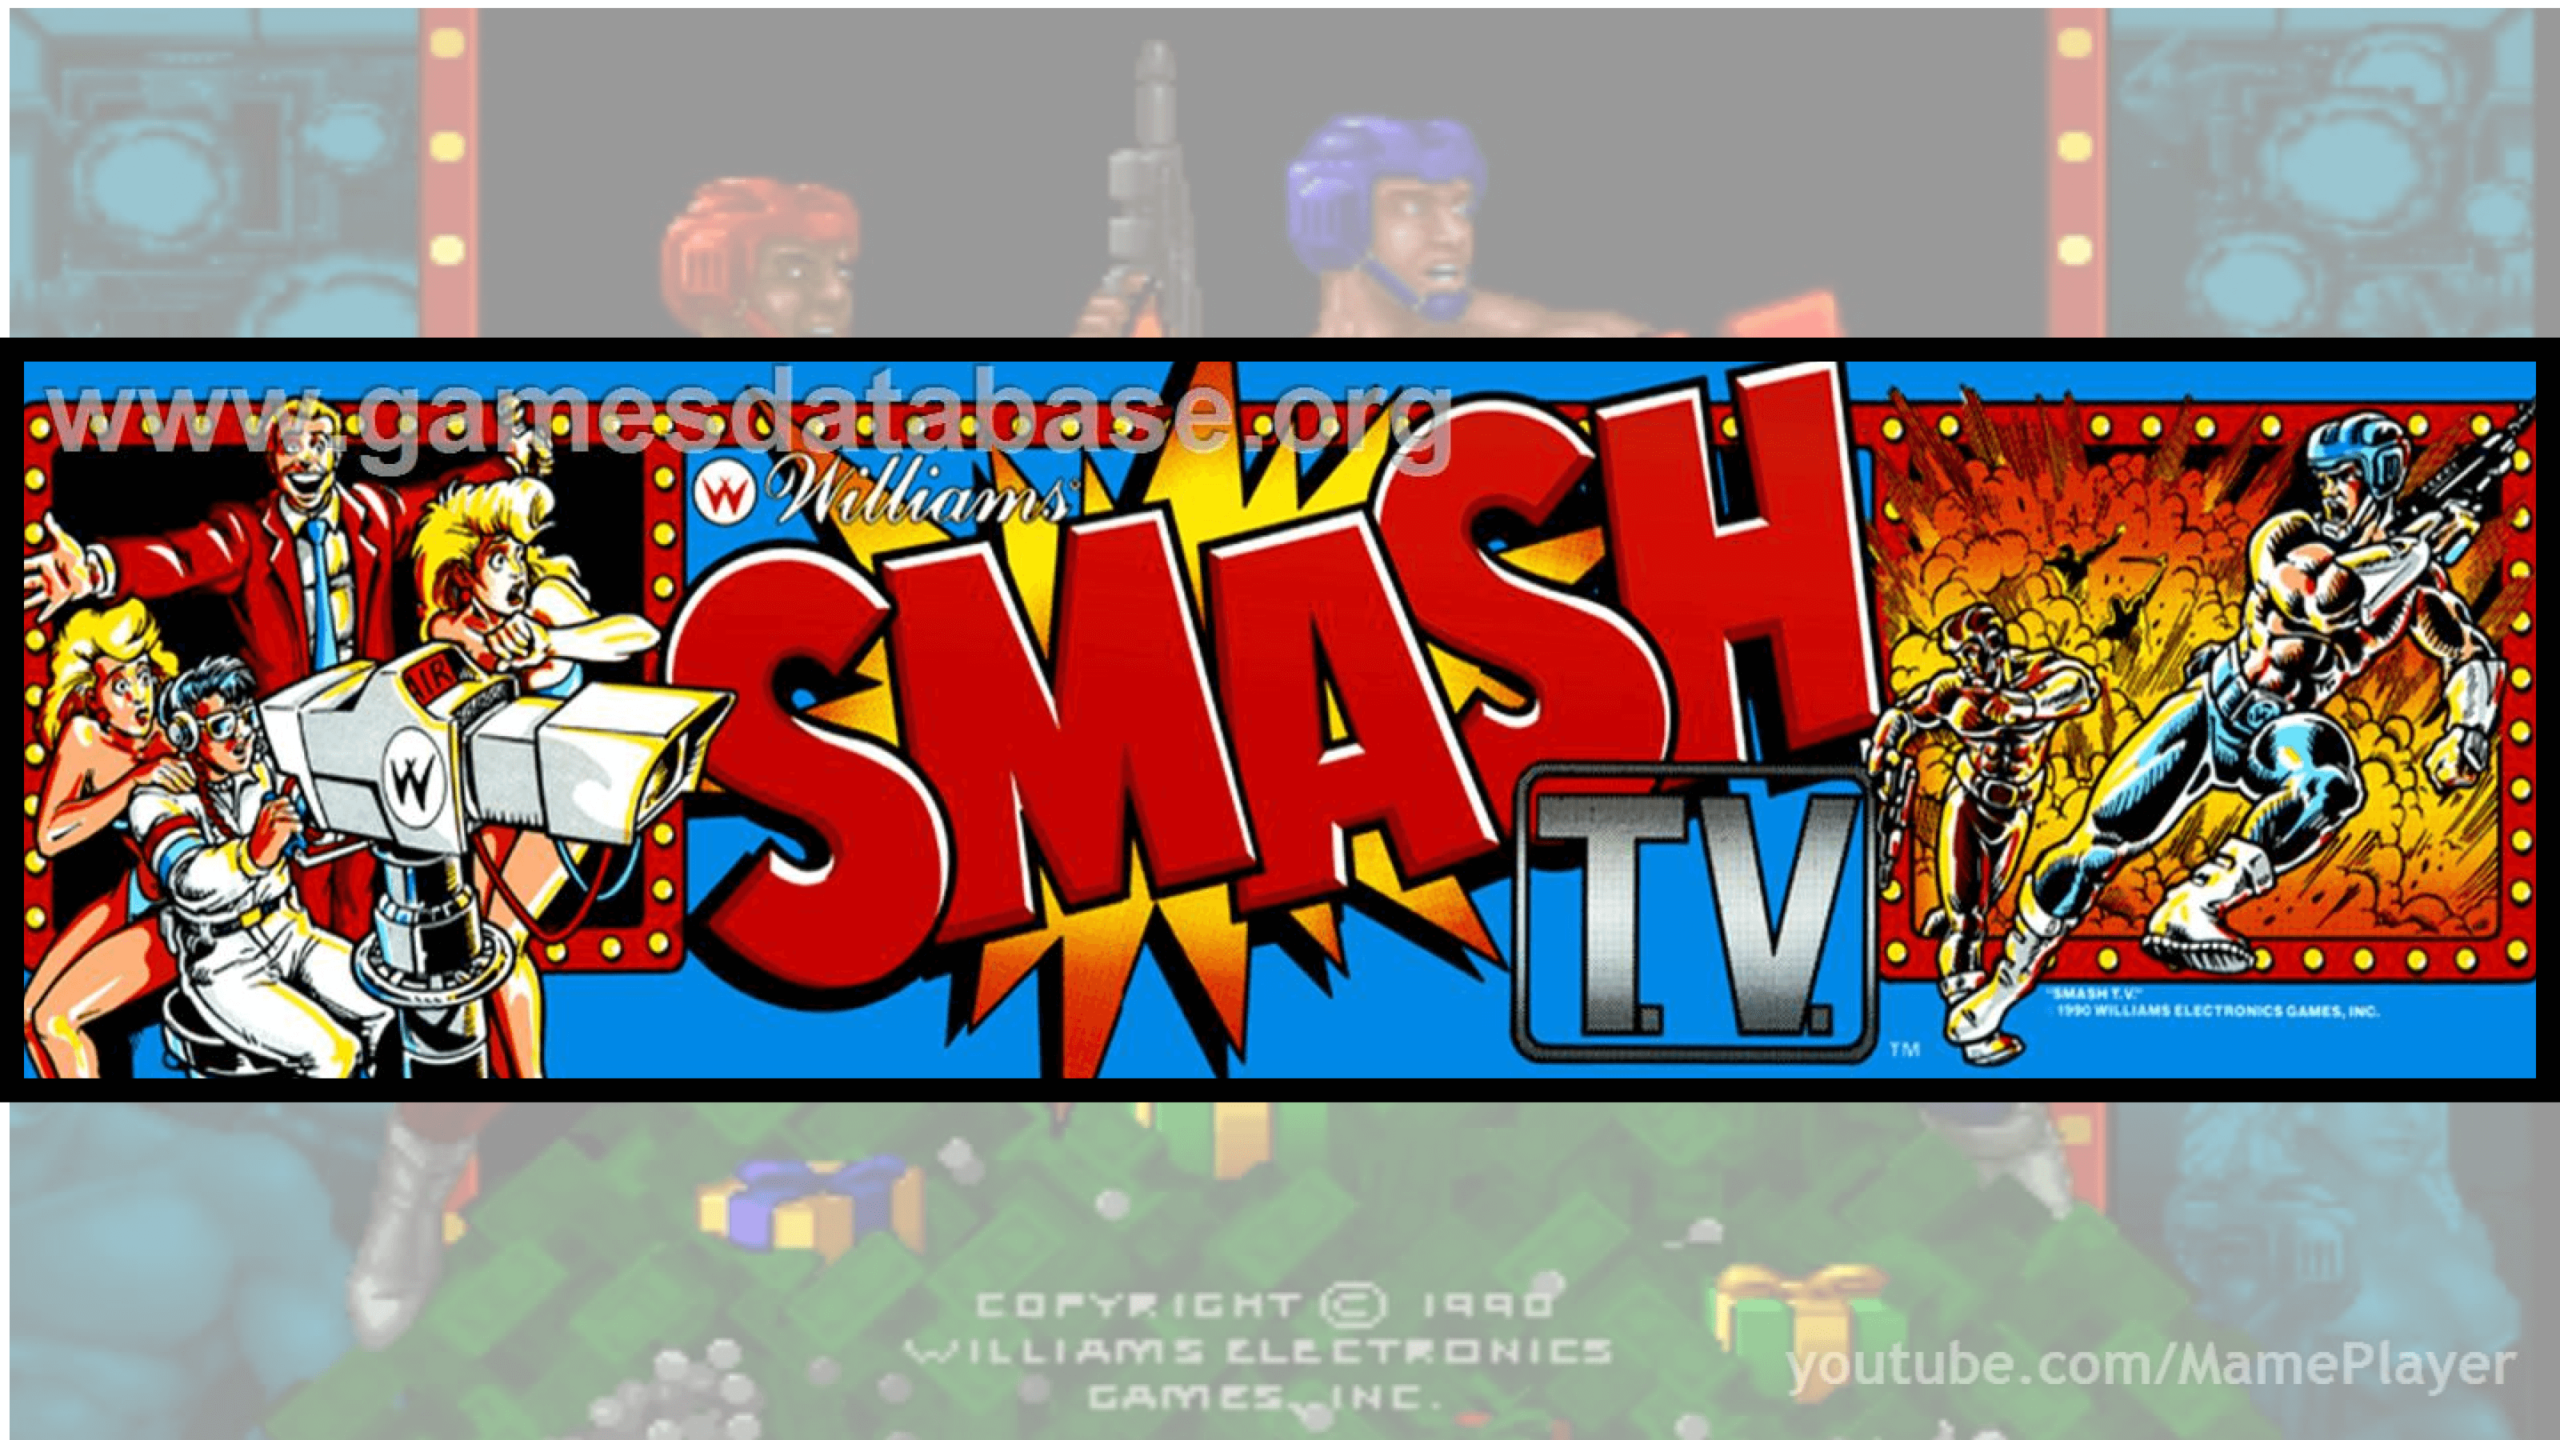 You are currently viewing A World of Games: Smash TV